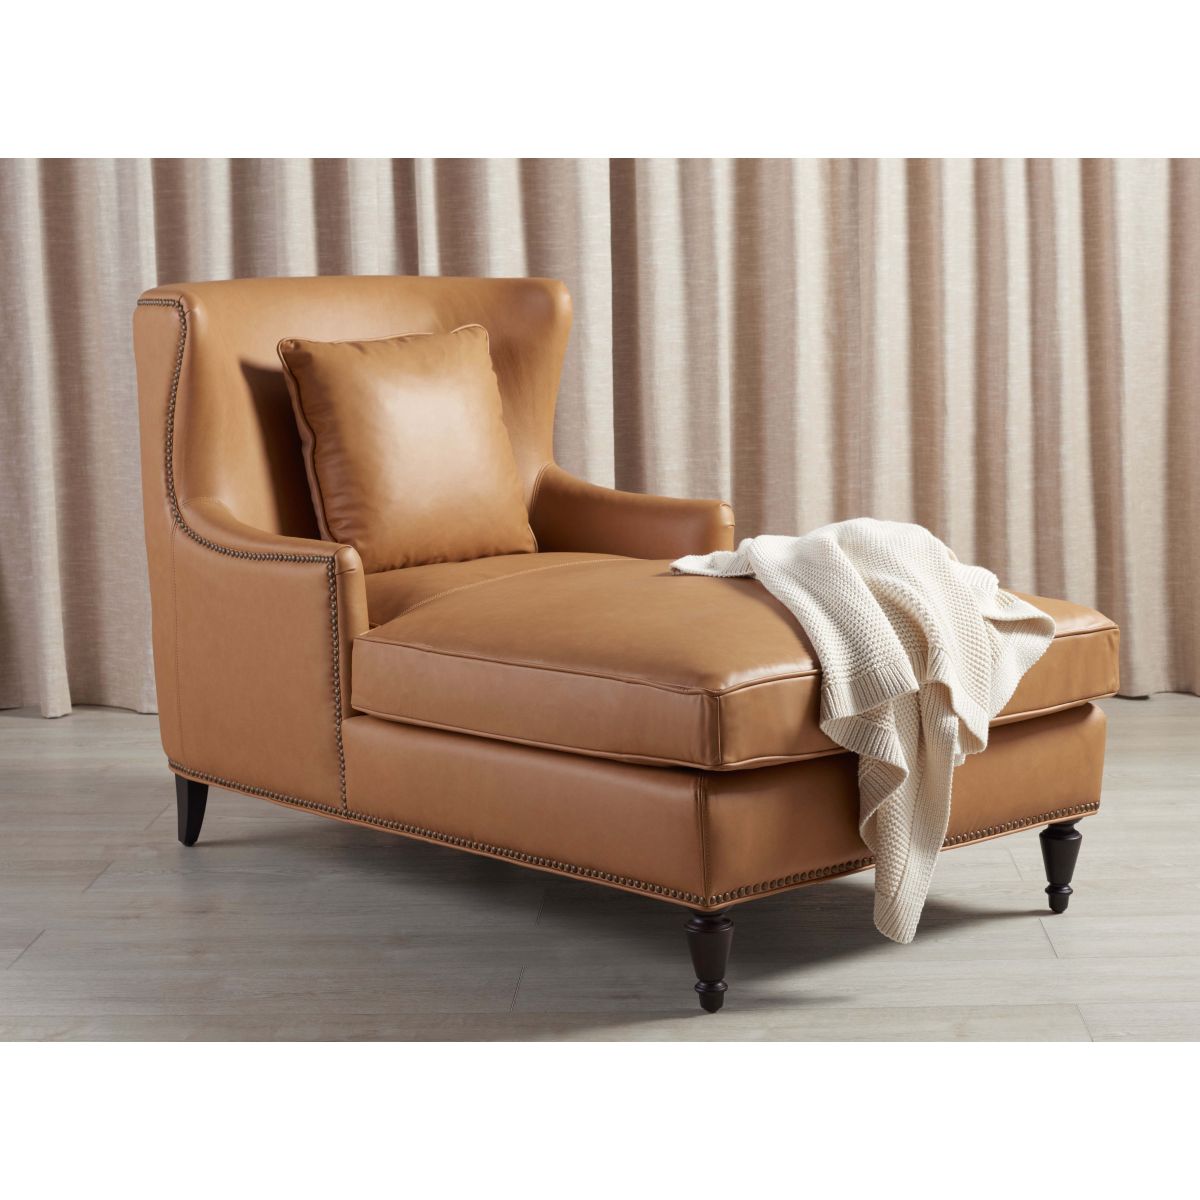 Safavieh Couture Jamie Upholstered Chaise Lounge - Light Brown